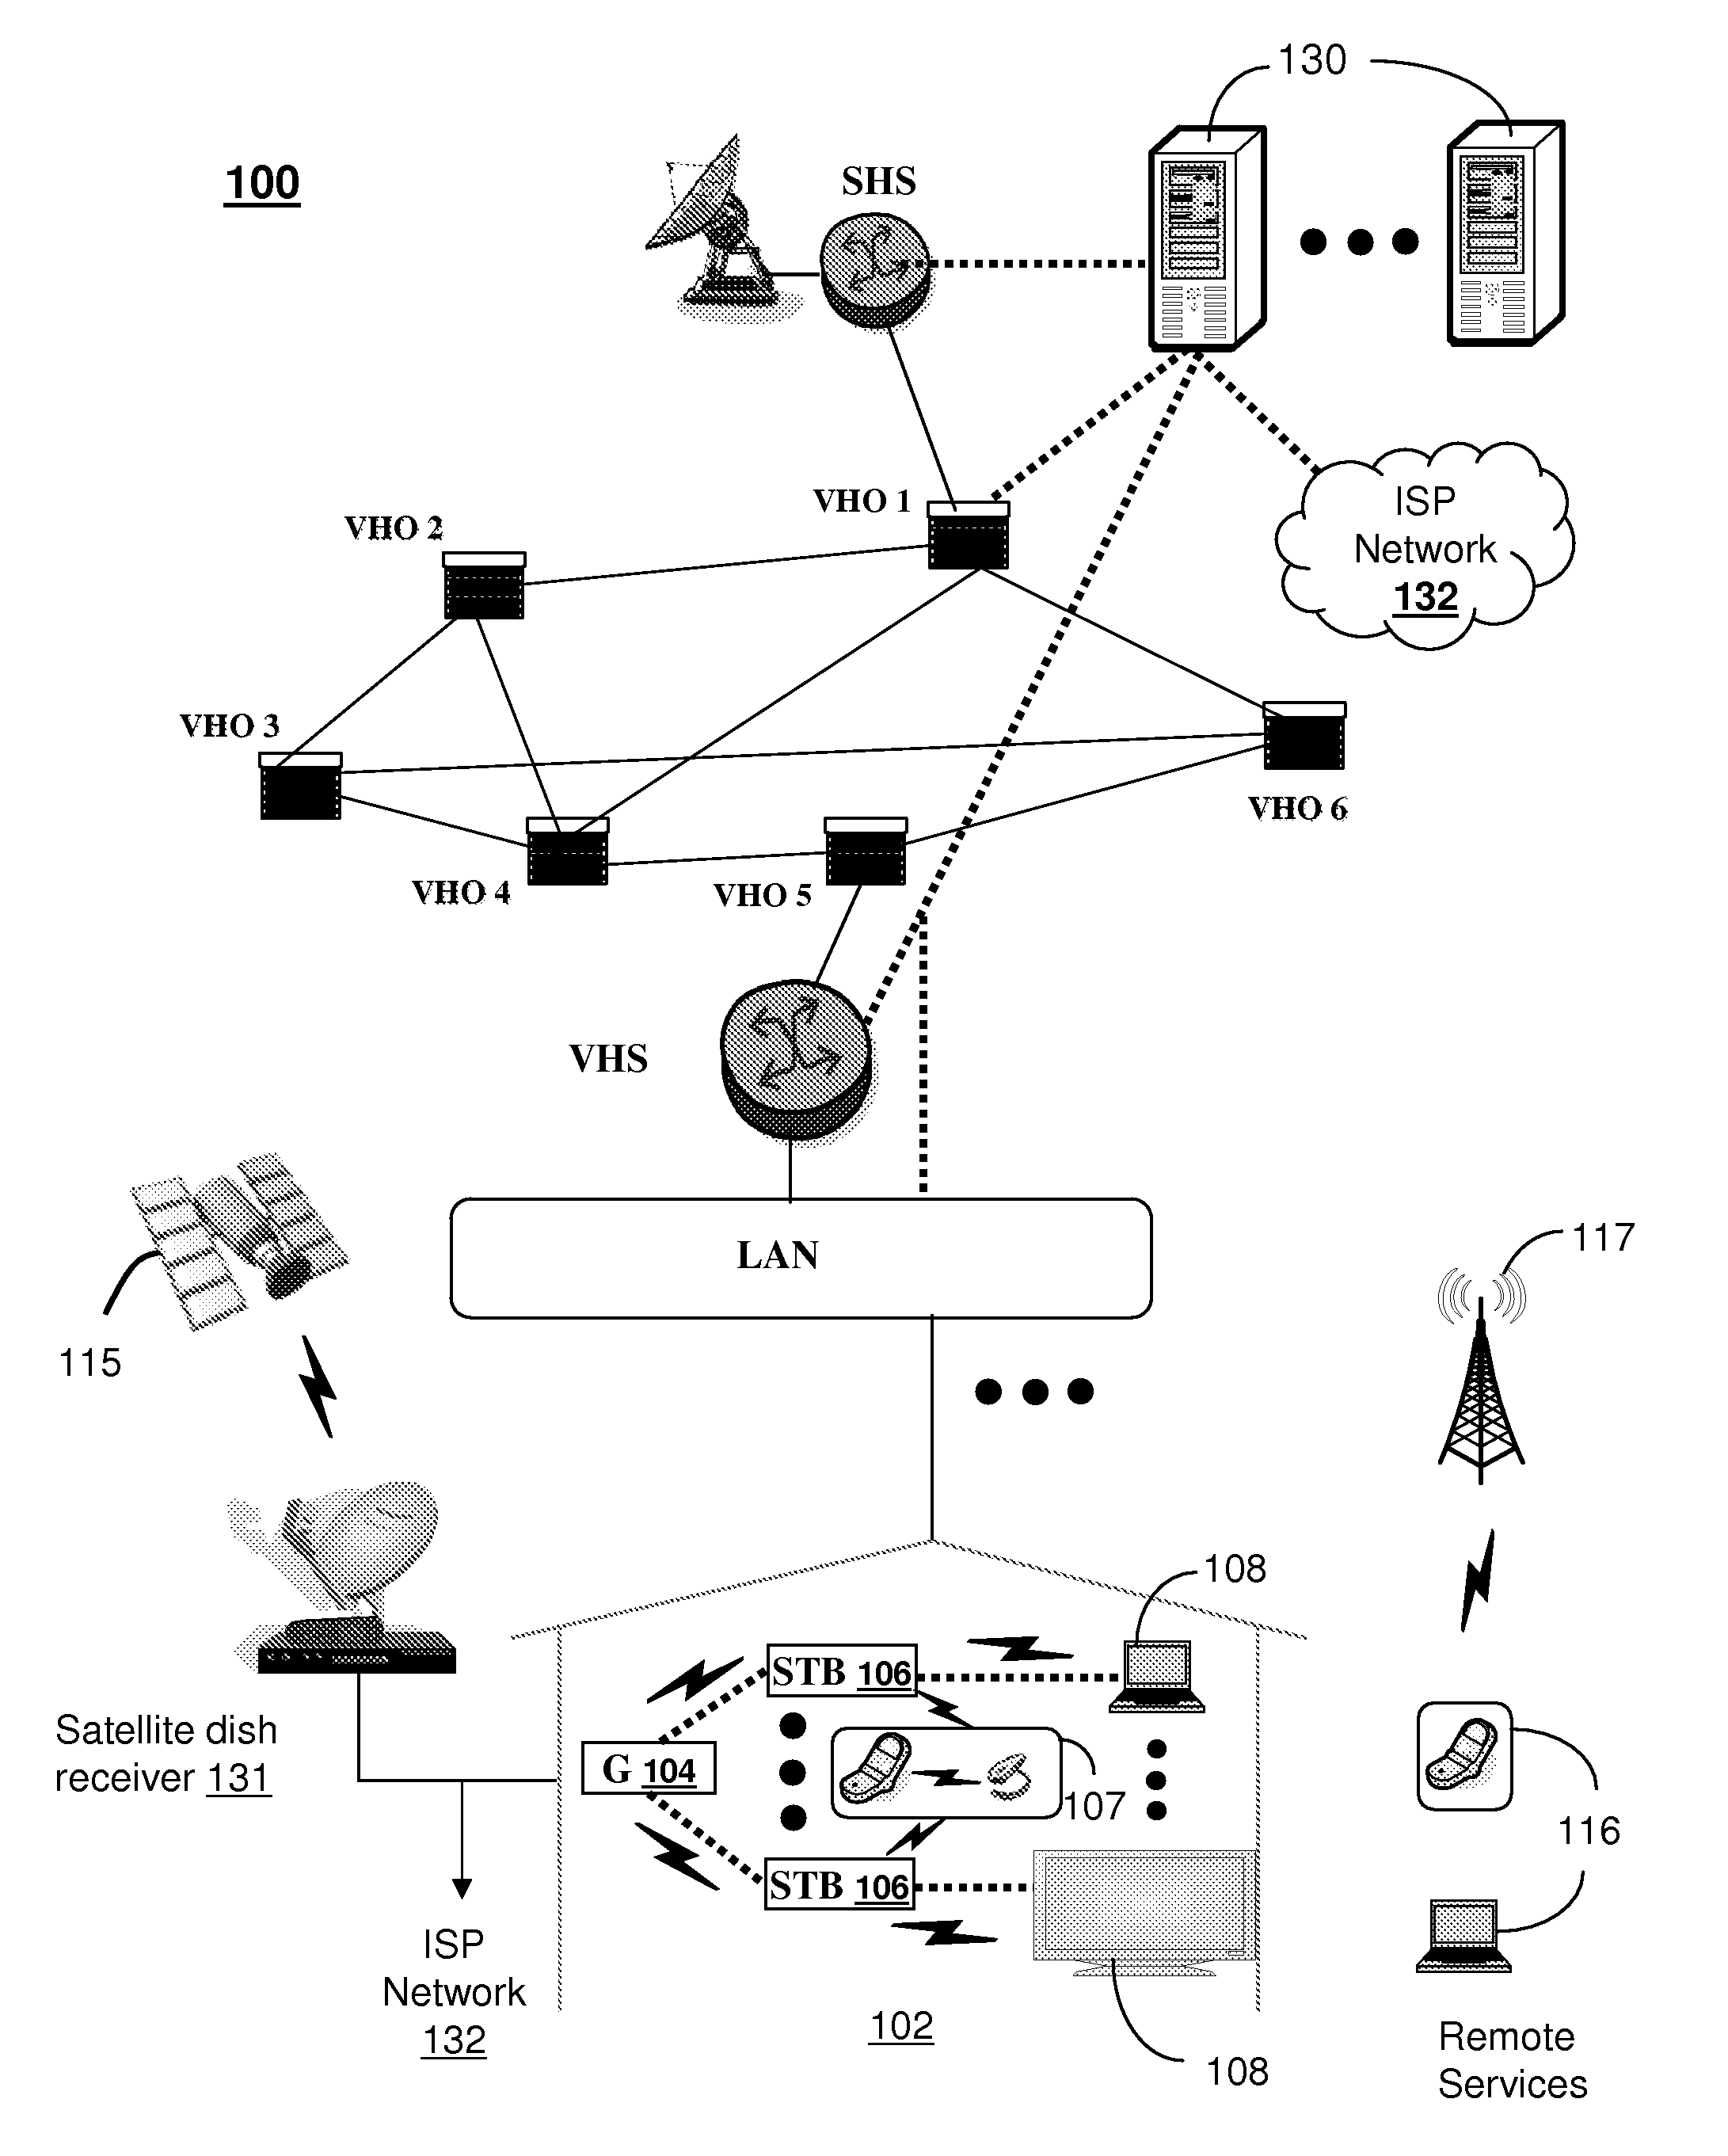 System for managing media services